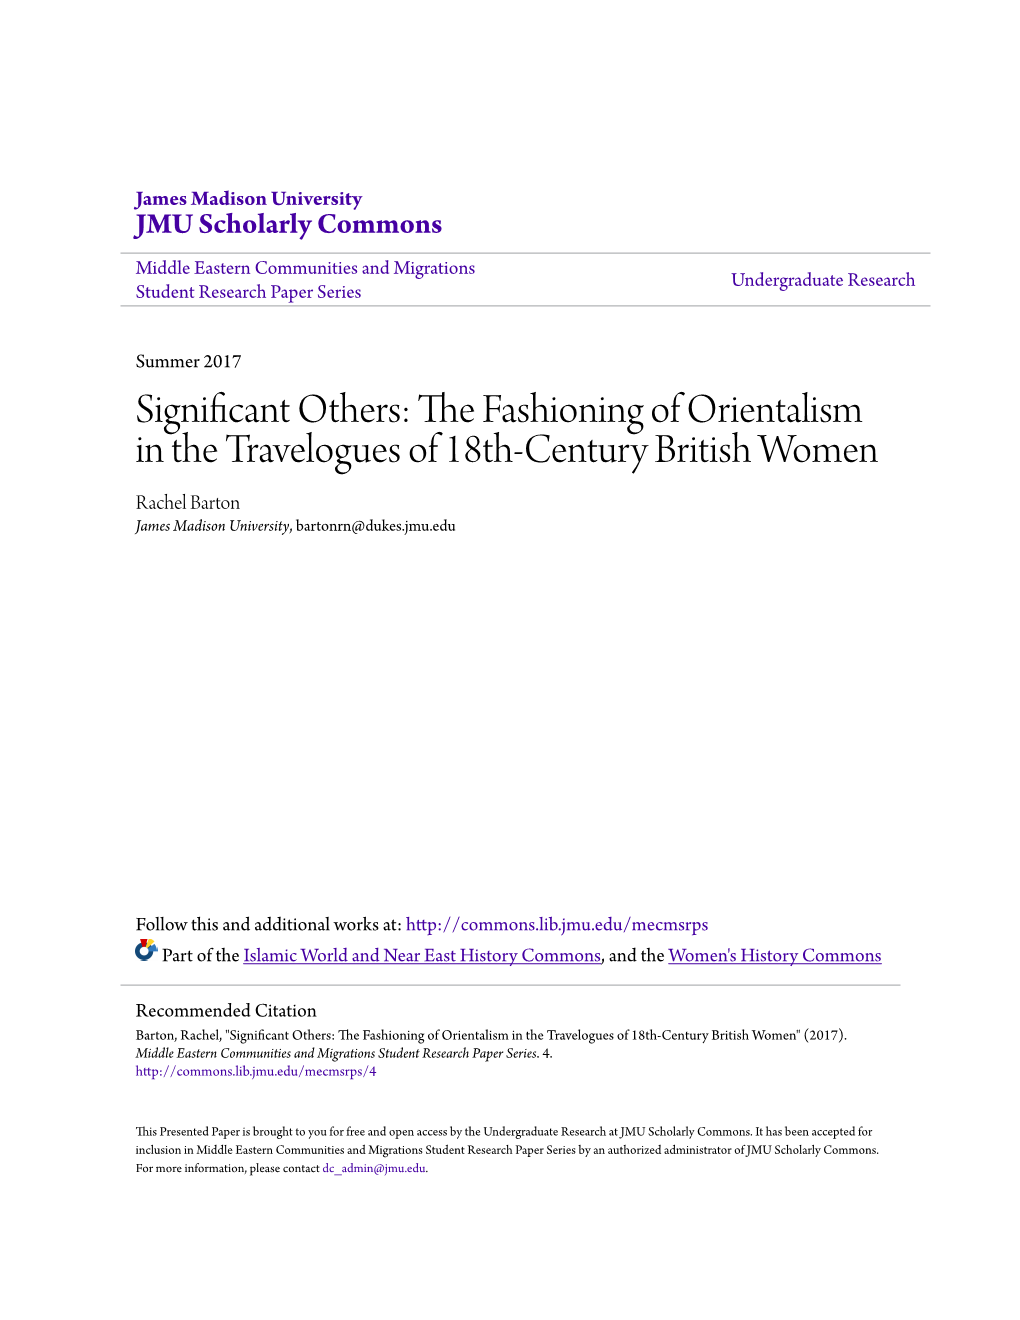 The Fashioning of Orientalism in the Travelogues of 18Th-Century British